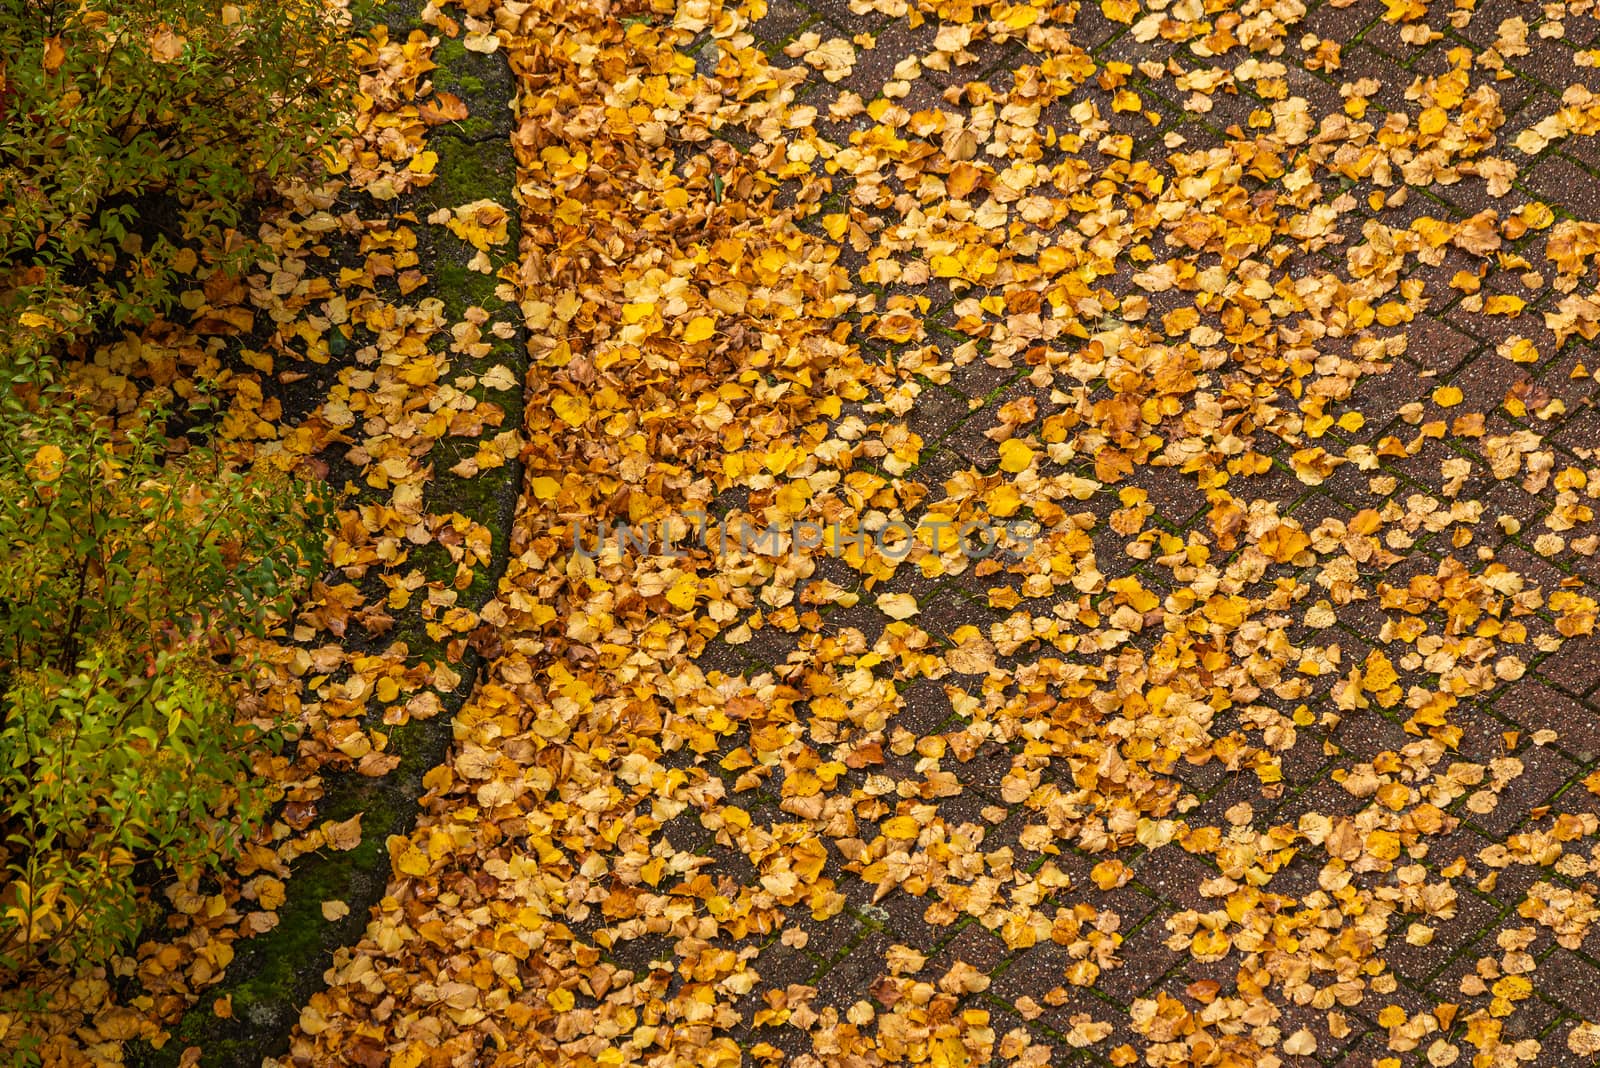 View from above of colorful autumn leaves in a parking lot.